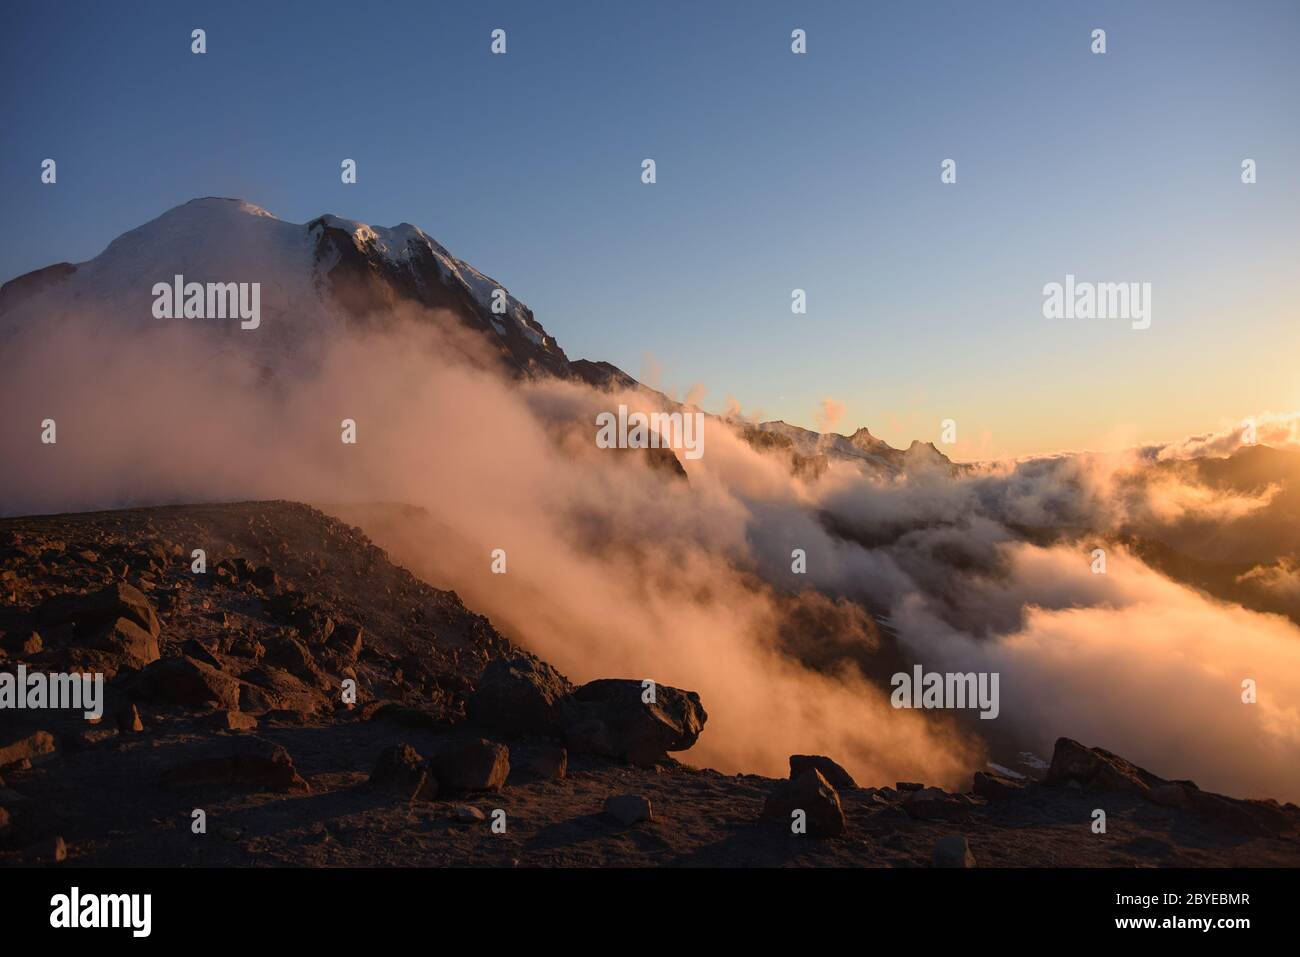 Top of a cliff and mountain peak with rolling clould. Mount Rainier National Park, Washington, at sunset. Stock Photo